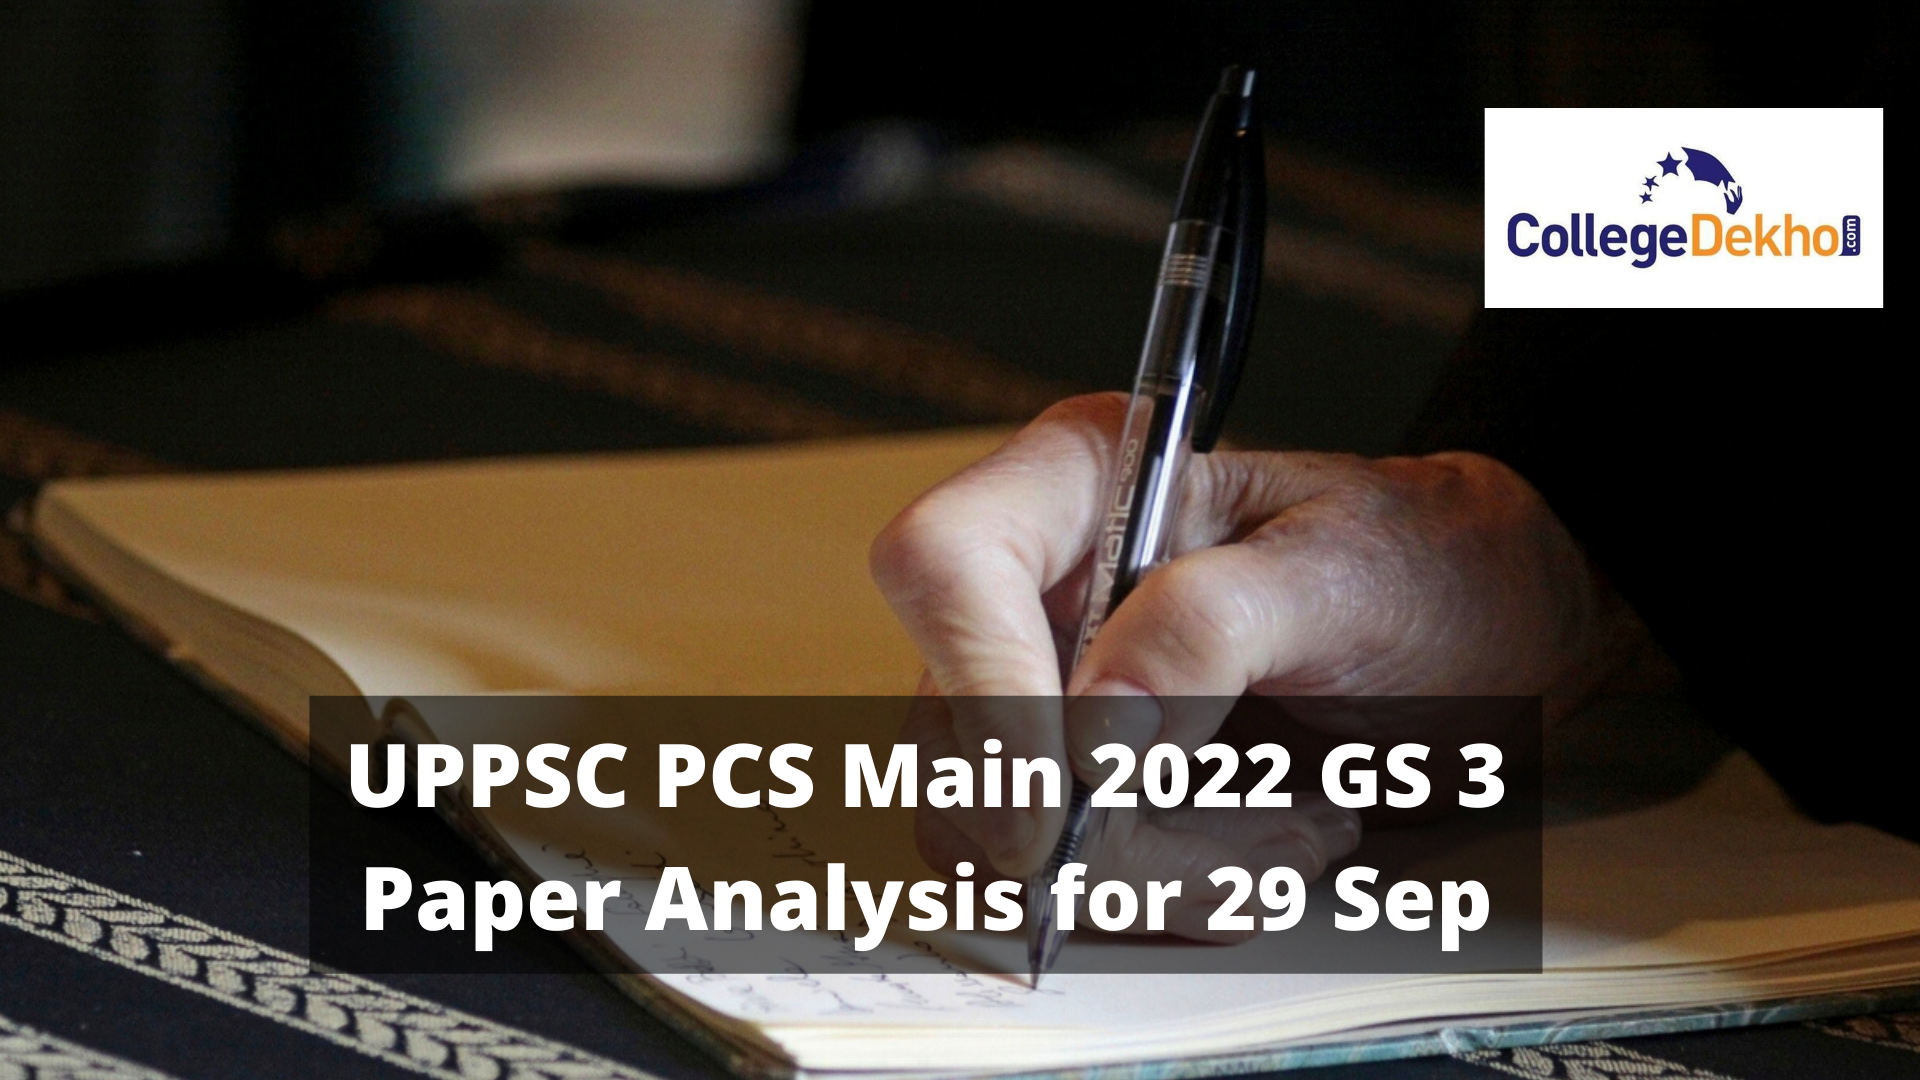 UPPSC PCS Main 2022 GS 3 Paper Analysis: Difficulty Level and Good Attempts